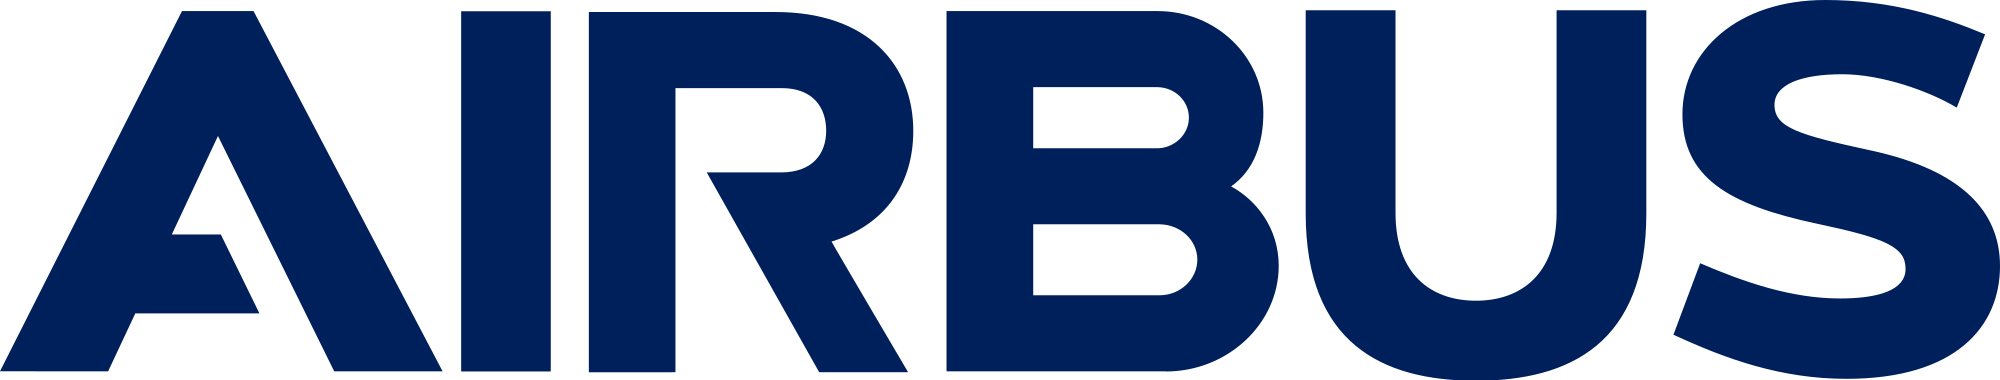 Airbus_Logo_2027.svg.png.2000px